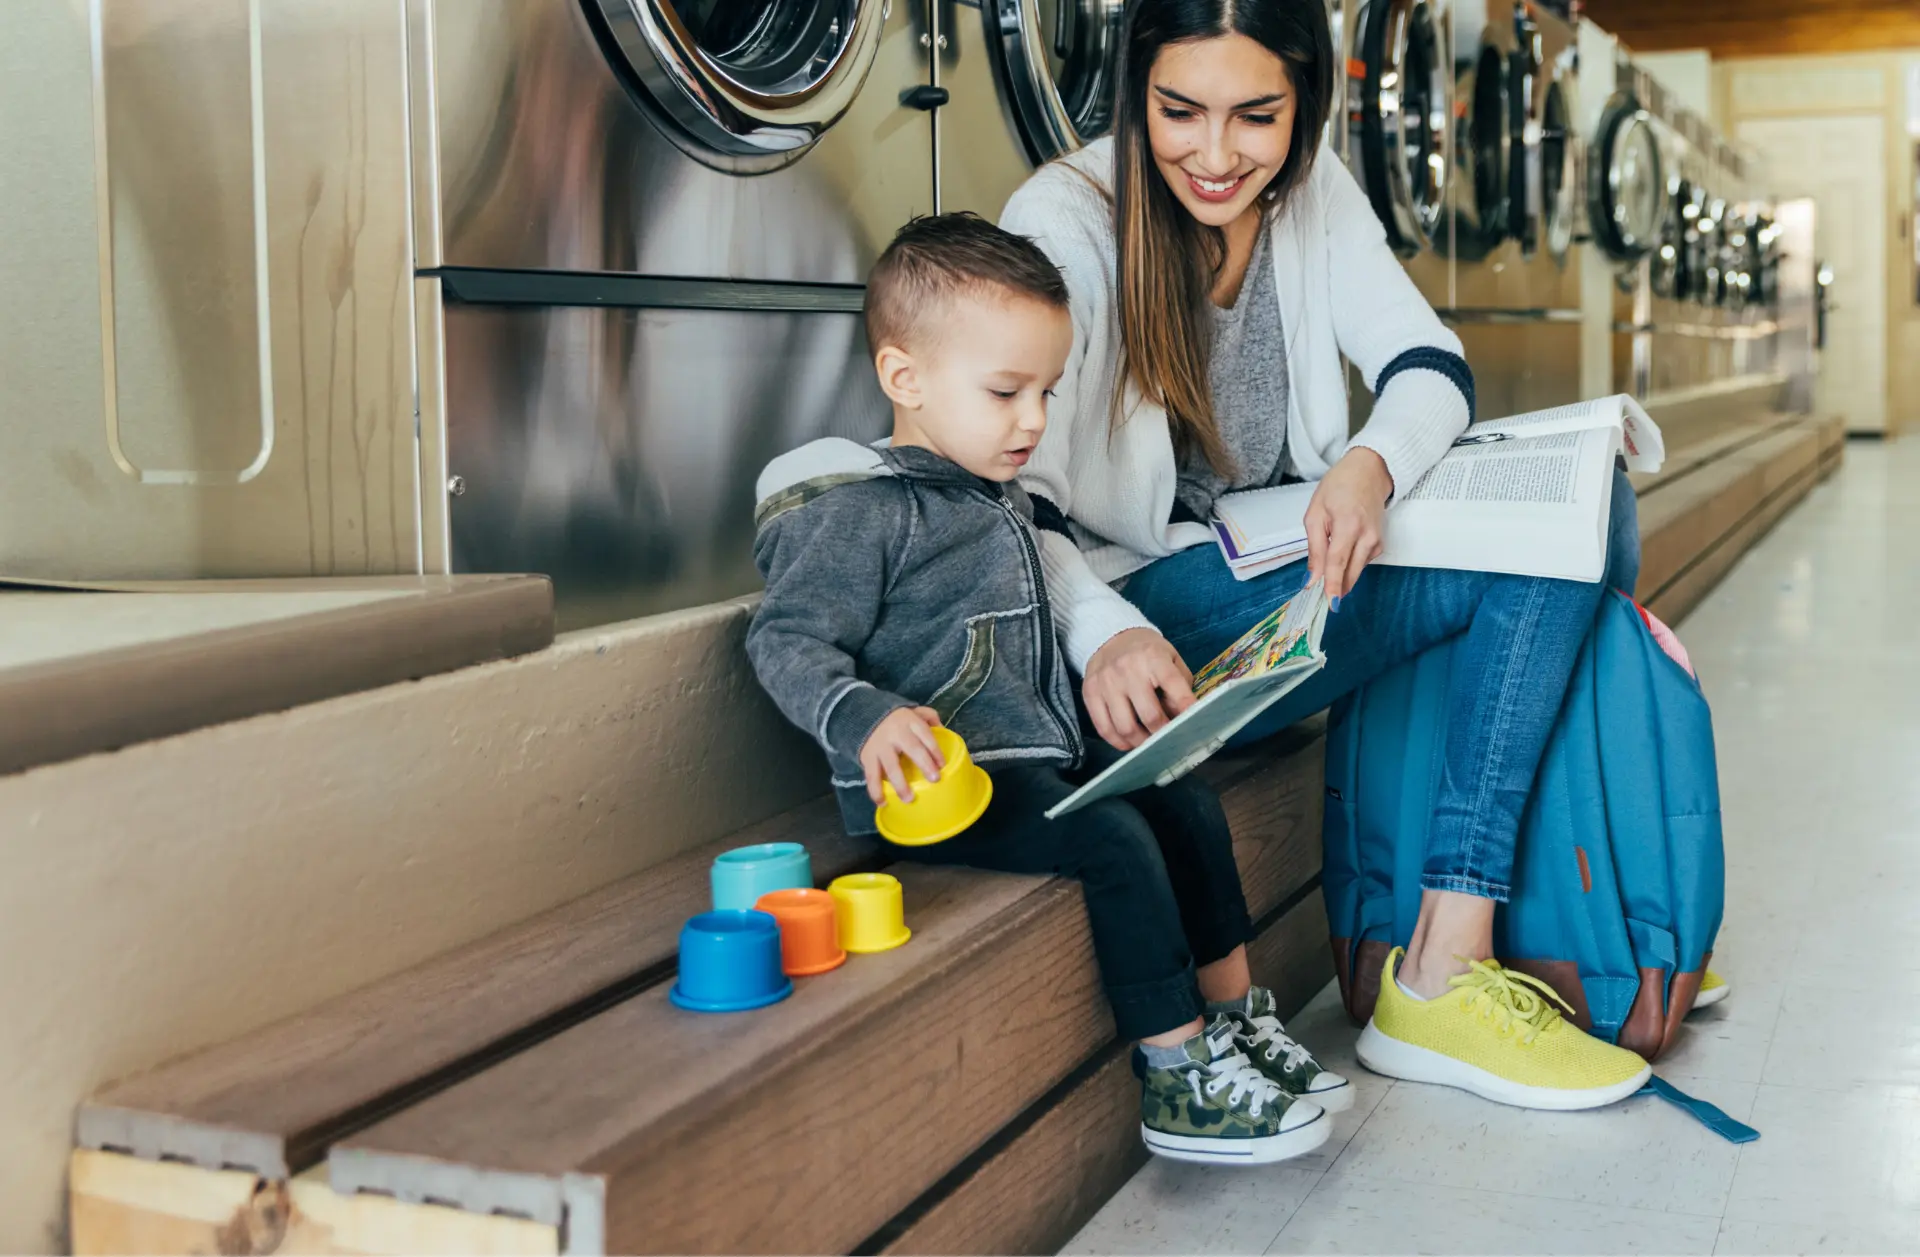 A young mom sitting in front of laundry machines with her toddler son. She has a textbook in her lap, but she's leaned over and reading his book to him. The boy is smiling and holding big colorful blocks.